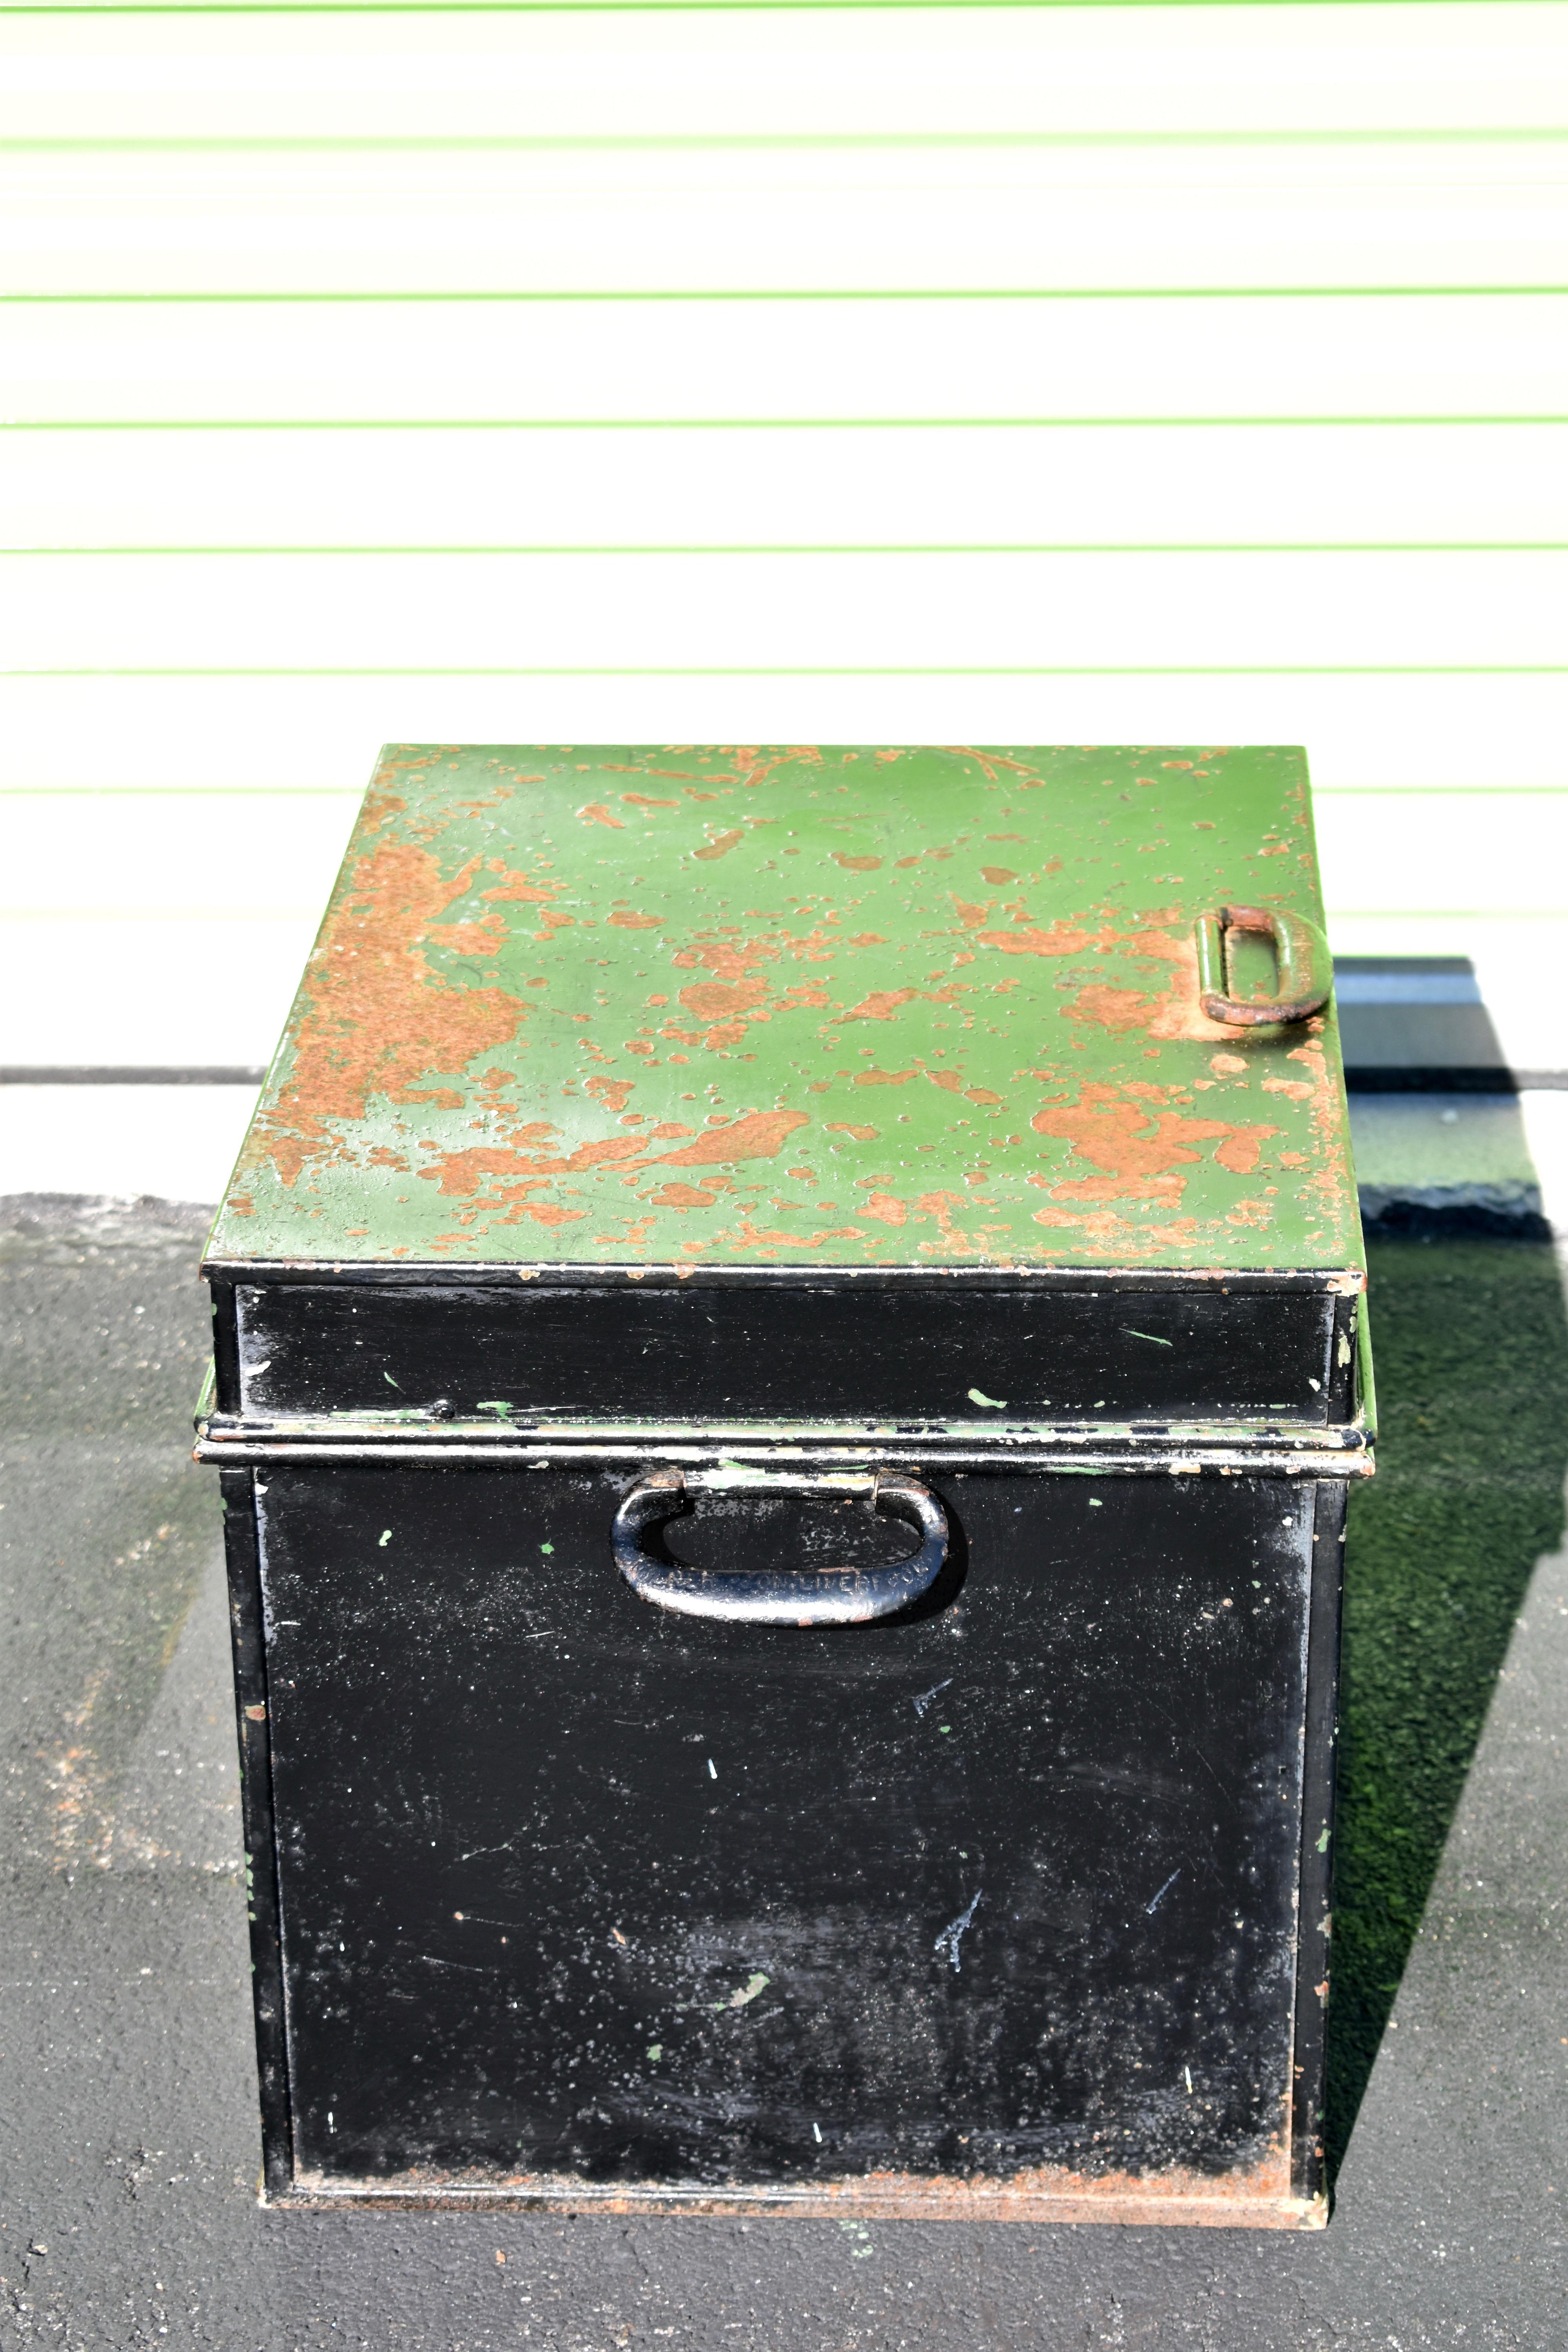 Antique Milners 212 Fire Safe or Strong Box, England, circa 1870 In Good Condition For Sale In Billerica, MA